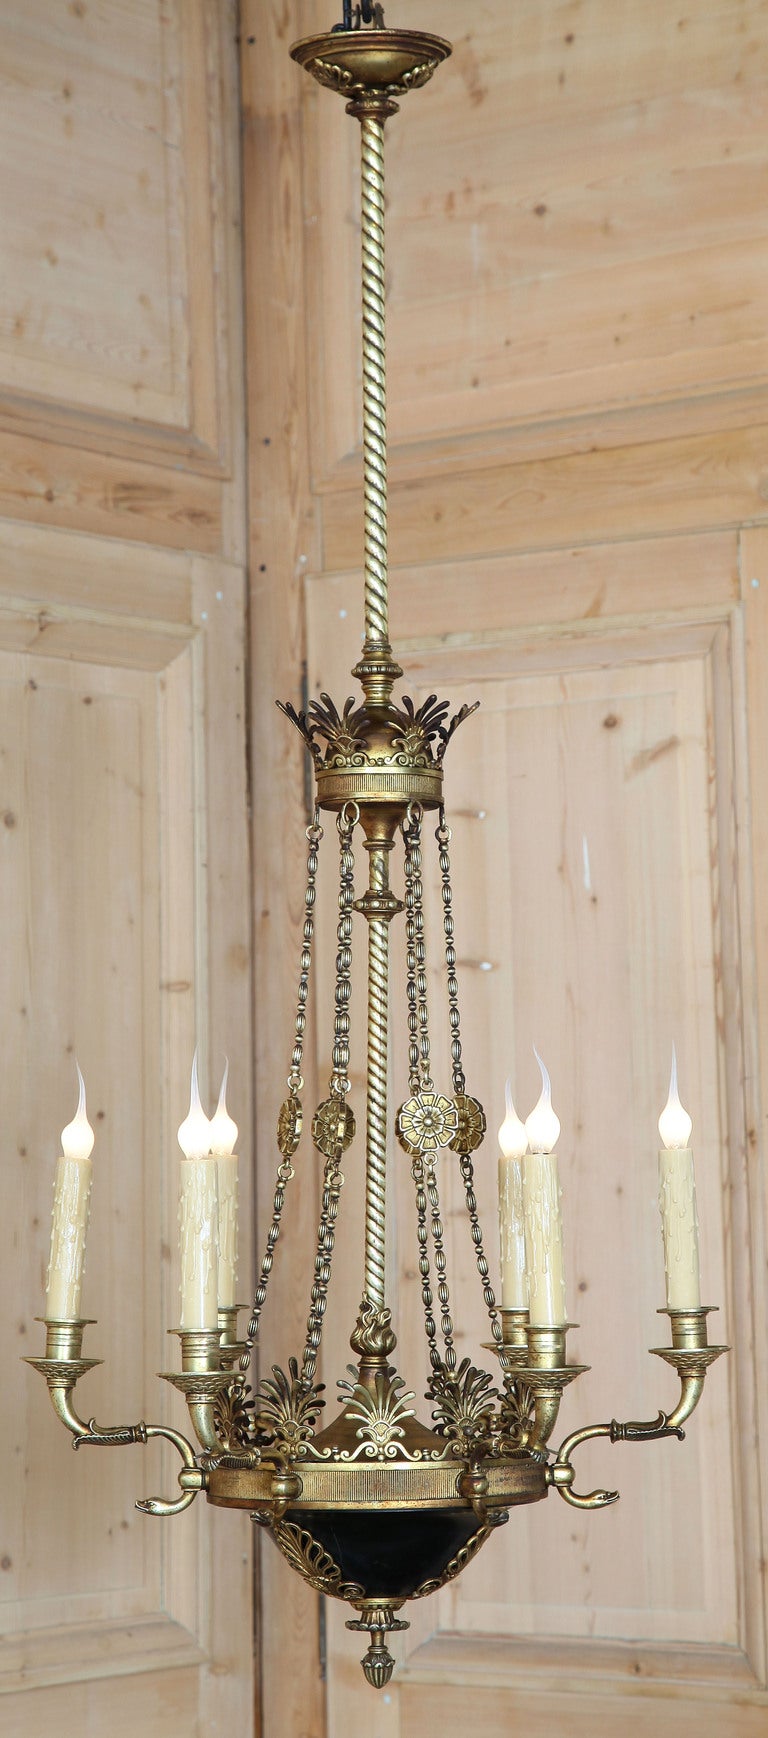 Hand-crafted from solid brass and bronze, this stunning chandelier is a definitive example of First Empire style and Second Empire quality! The brass bell at the bottom has been finished in a very dark green as was the custom, which contrasted with